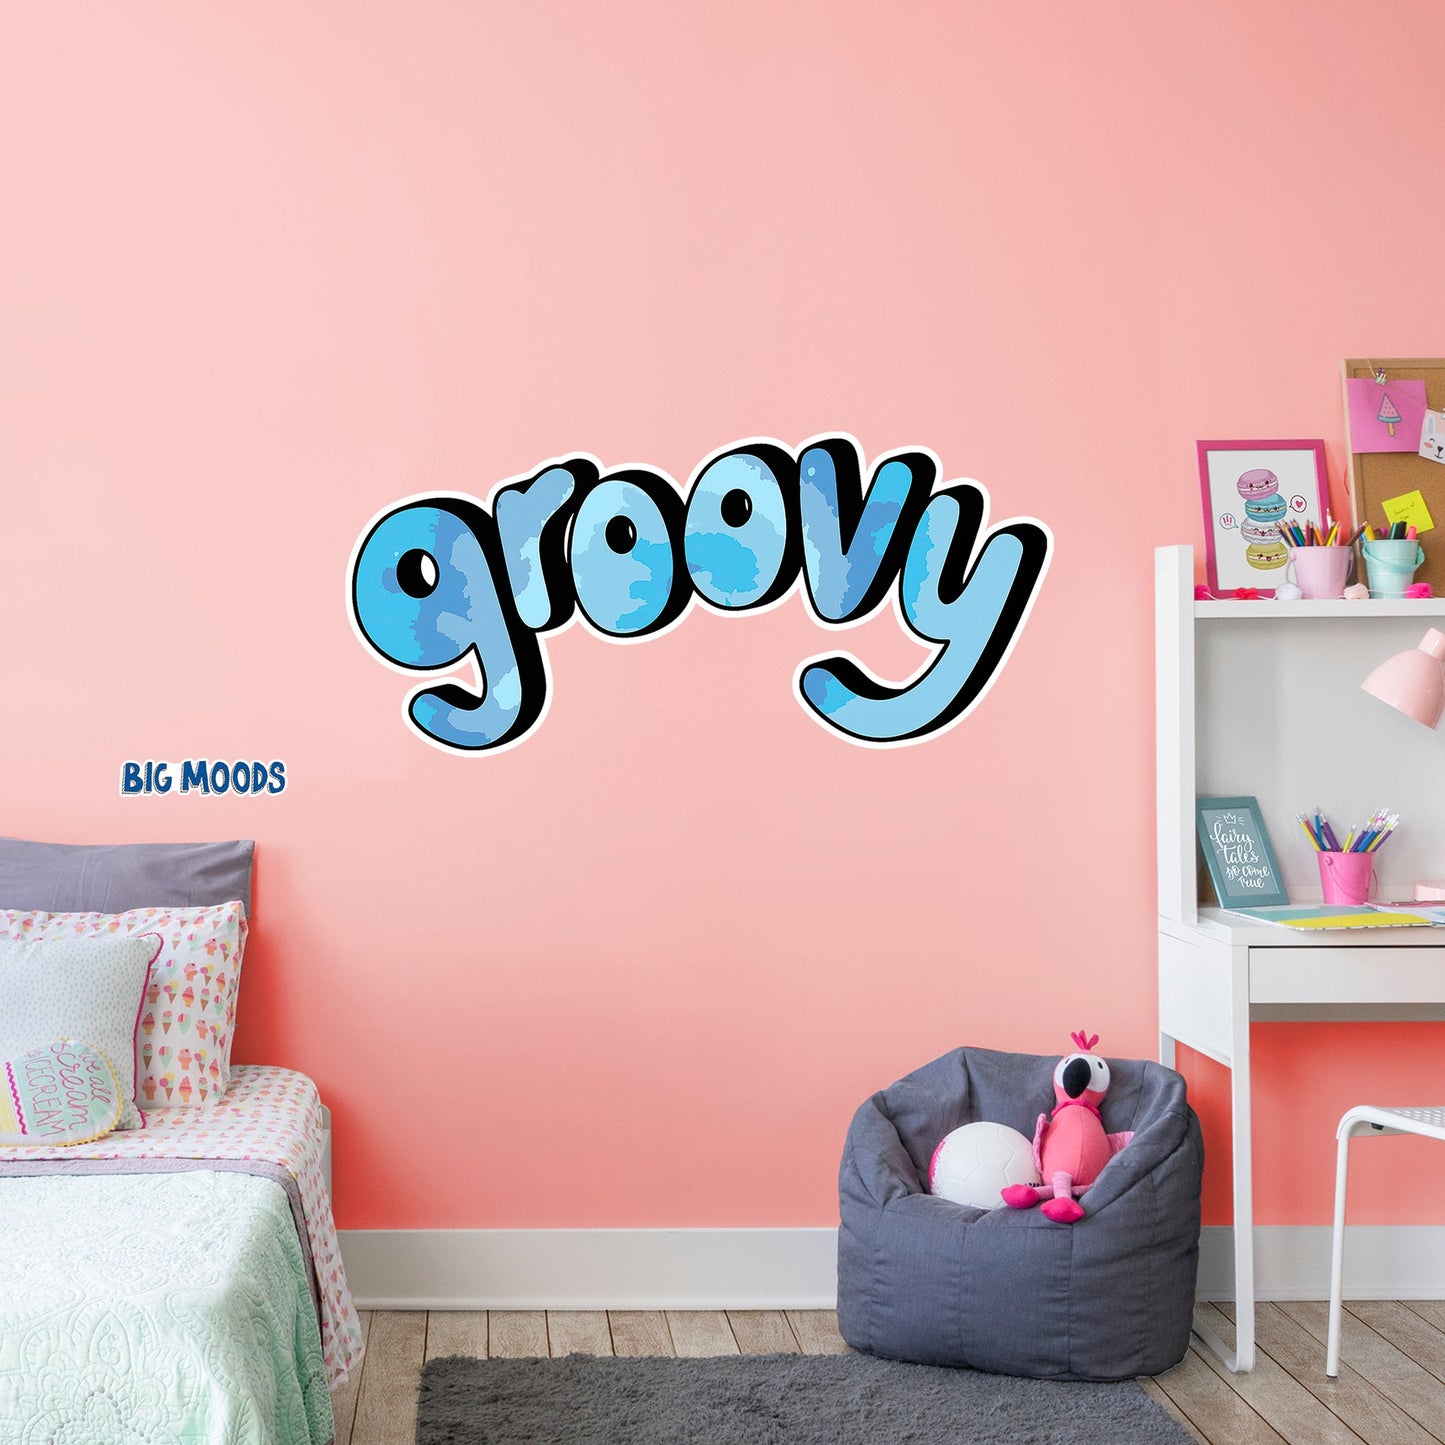 Groovy (Blue)        - Officially Licensed Big Moods Removable     Adhesive Decal